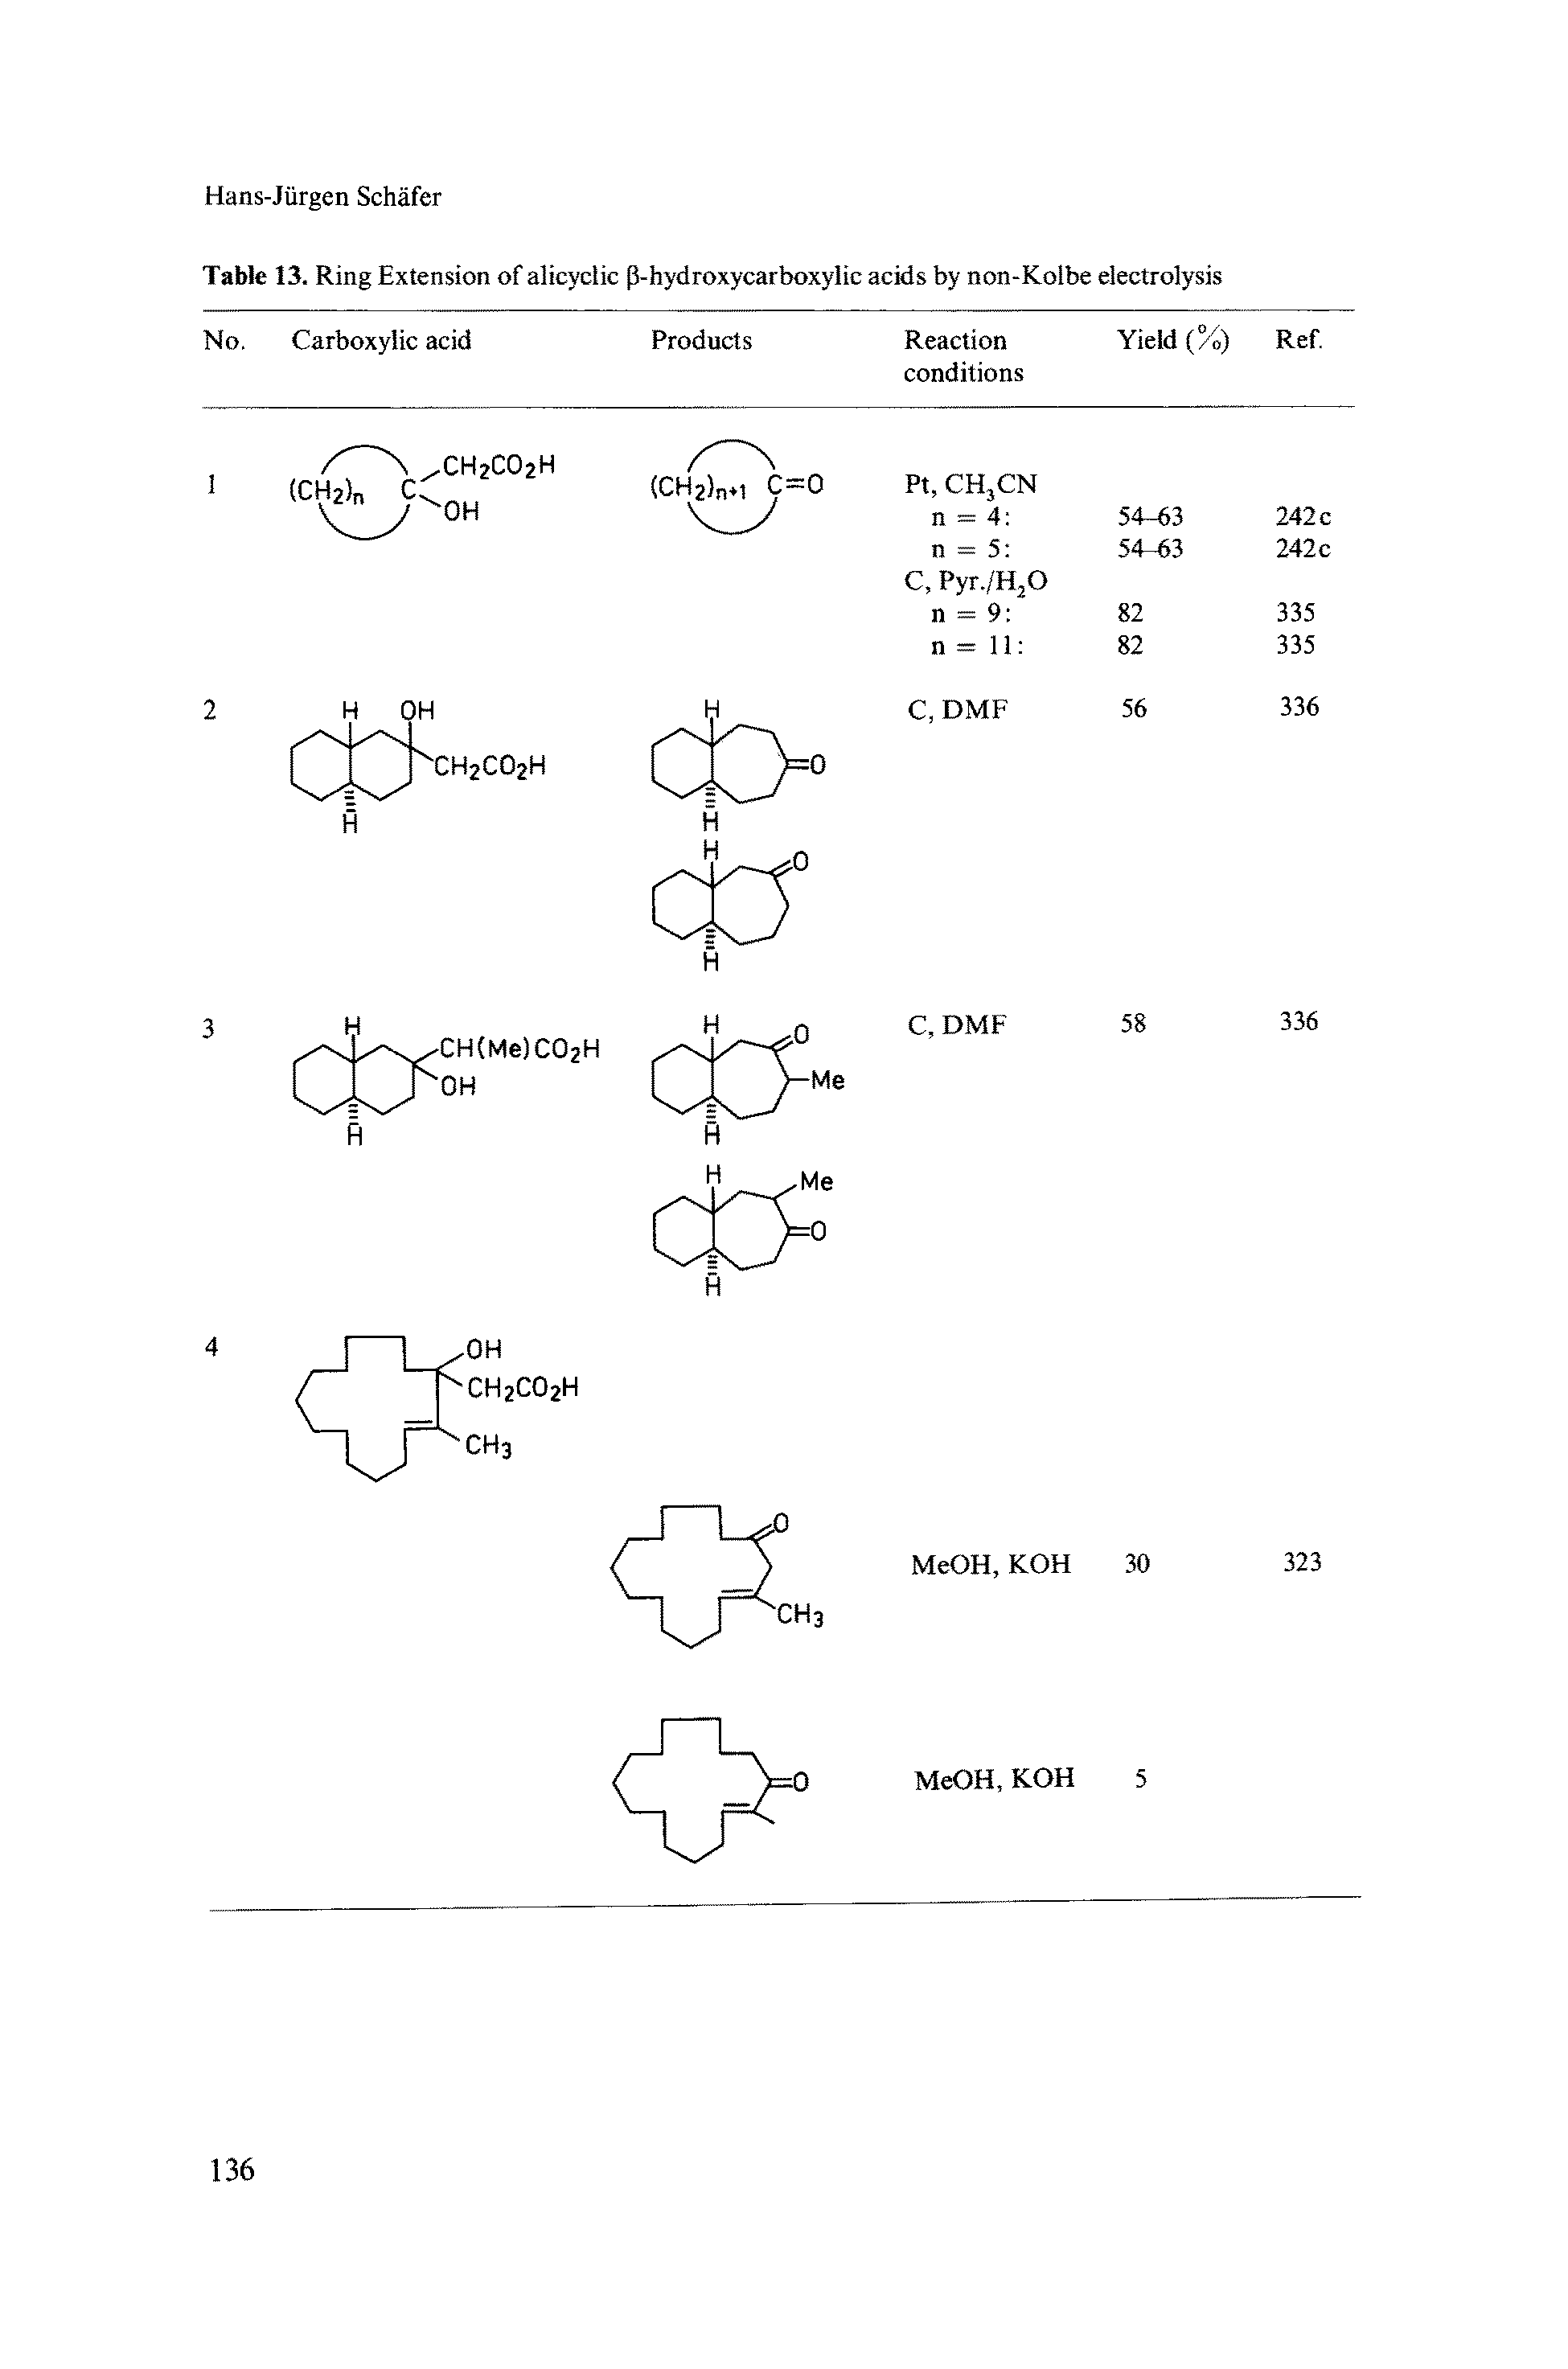 Table 13. Ring Extension of alicyclic P-hydroxycarboxylic acids by non-Kolbe electrolysis...